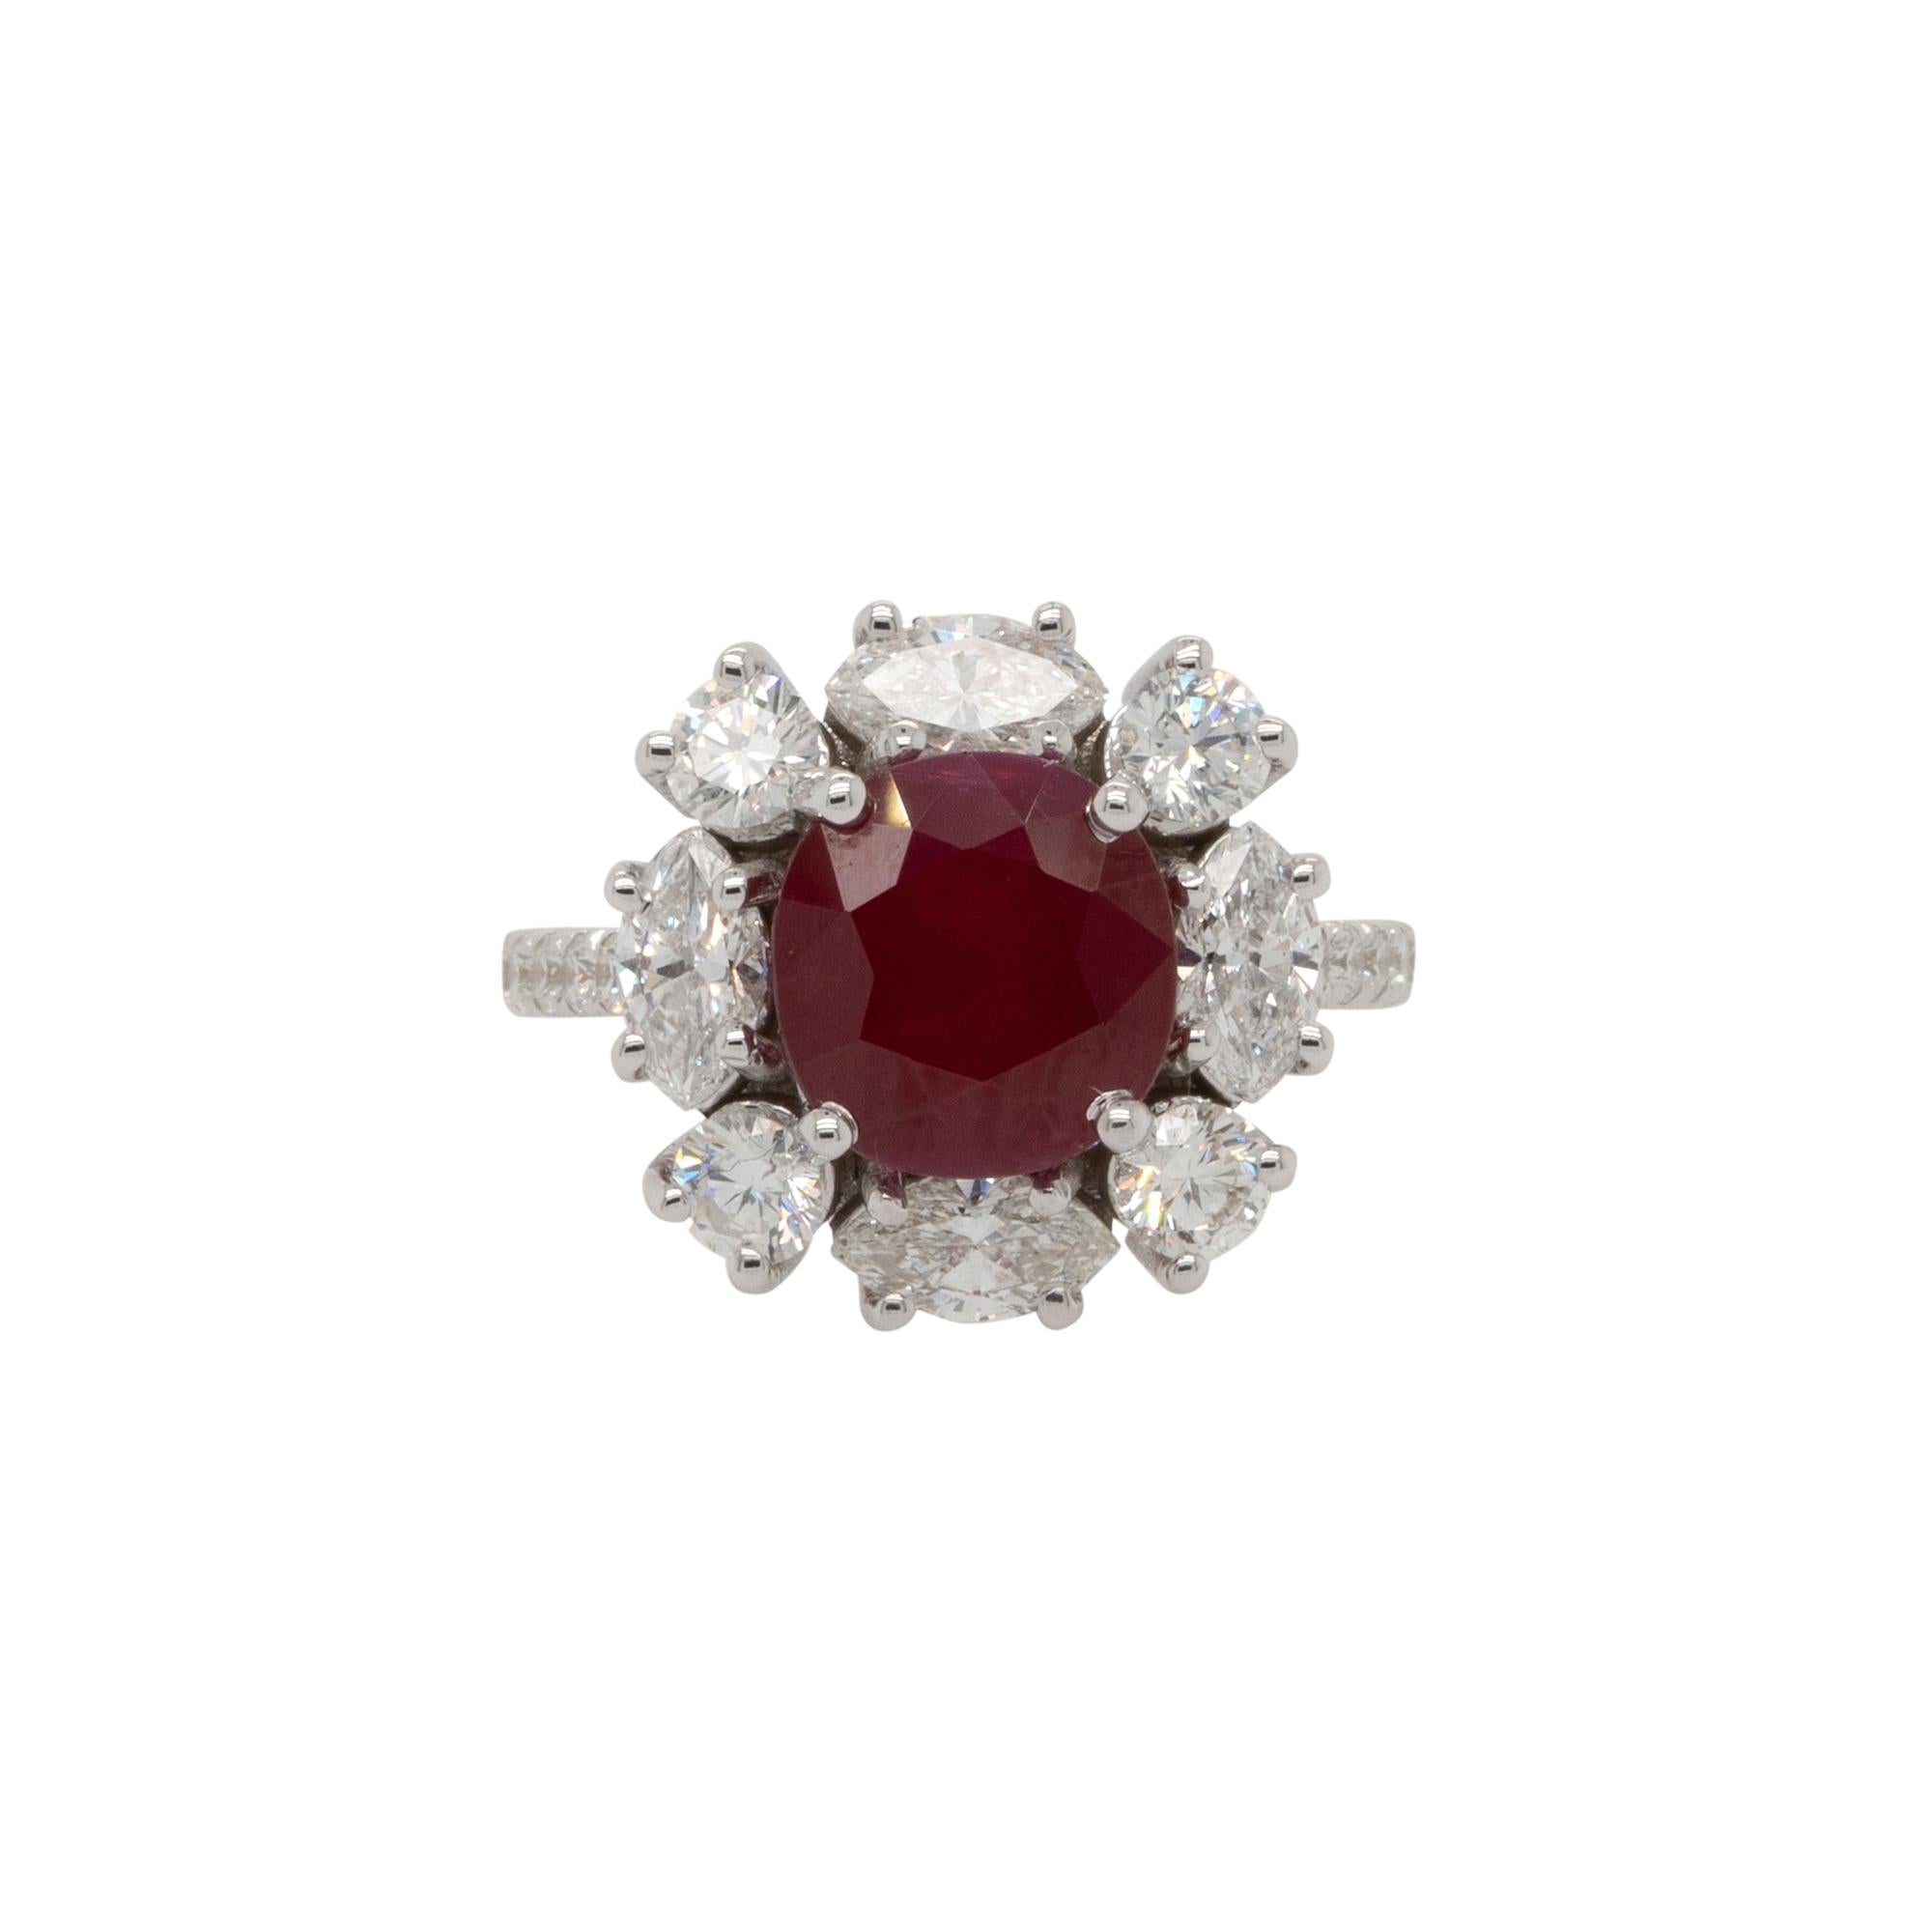 Center Details: 3.53ct Natural Oval Cut Ruby gemstone

Measurements: 9.35 x 8.87 x 4.73 mm

Ring Material: 18k white gold

Ring Details: White gold mounting featuring 1.95ctw of round and marquise cut diamonds. Diamonds are G/H in color and VS in